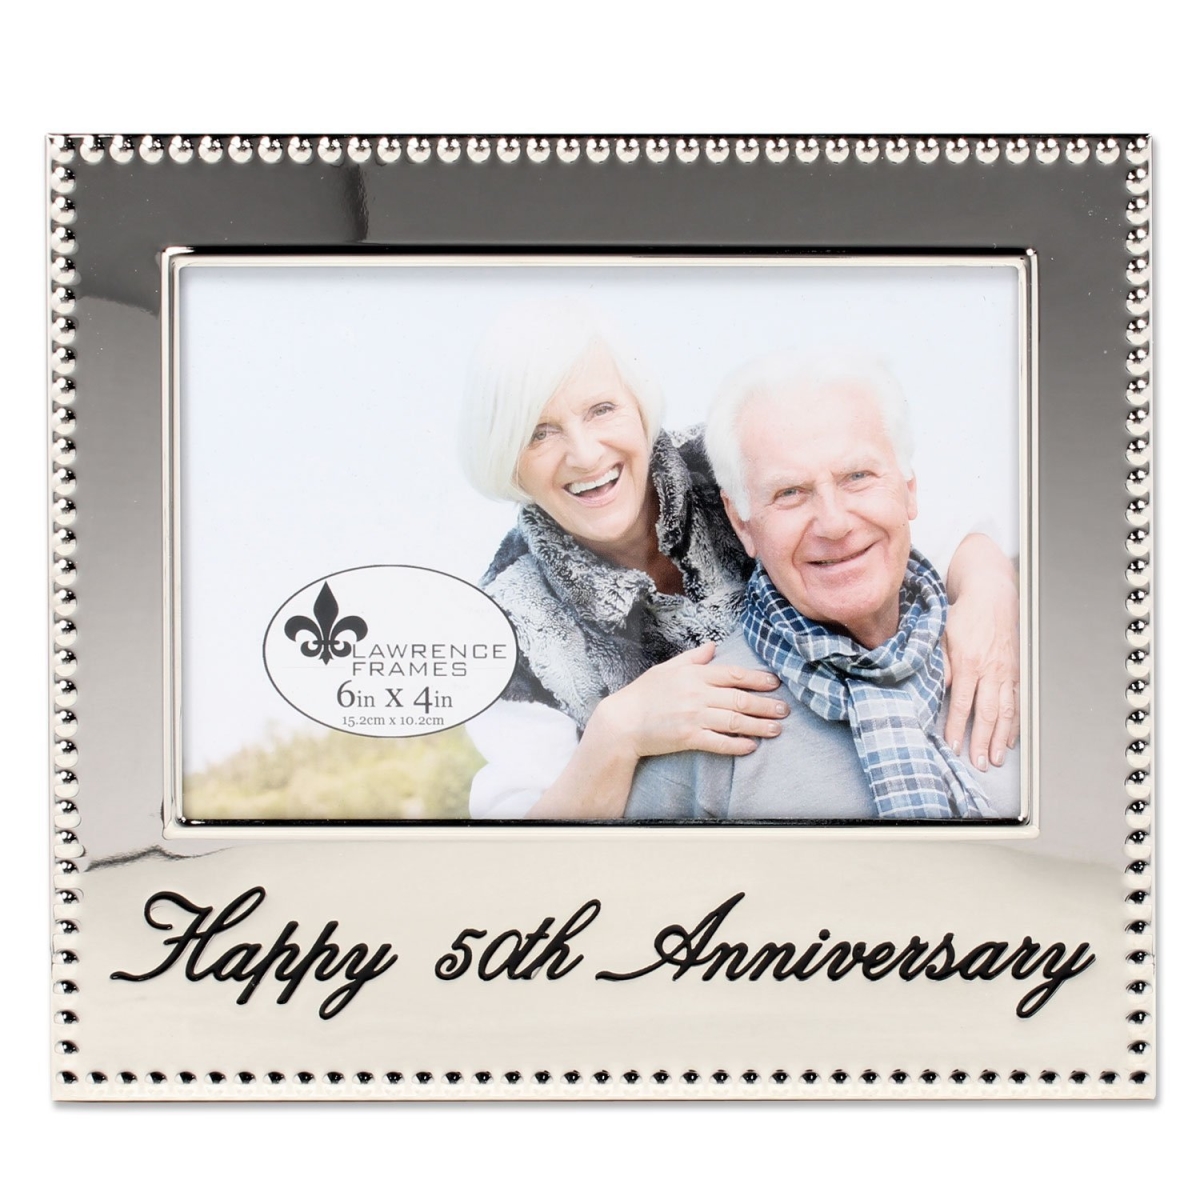 Lawrenceframes 290164 4 X 6 In. Happy 50th Anniversary Picture Frame, Silver